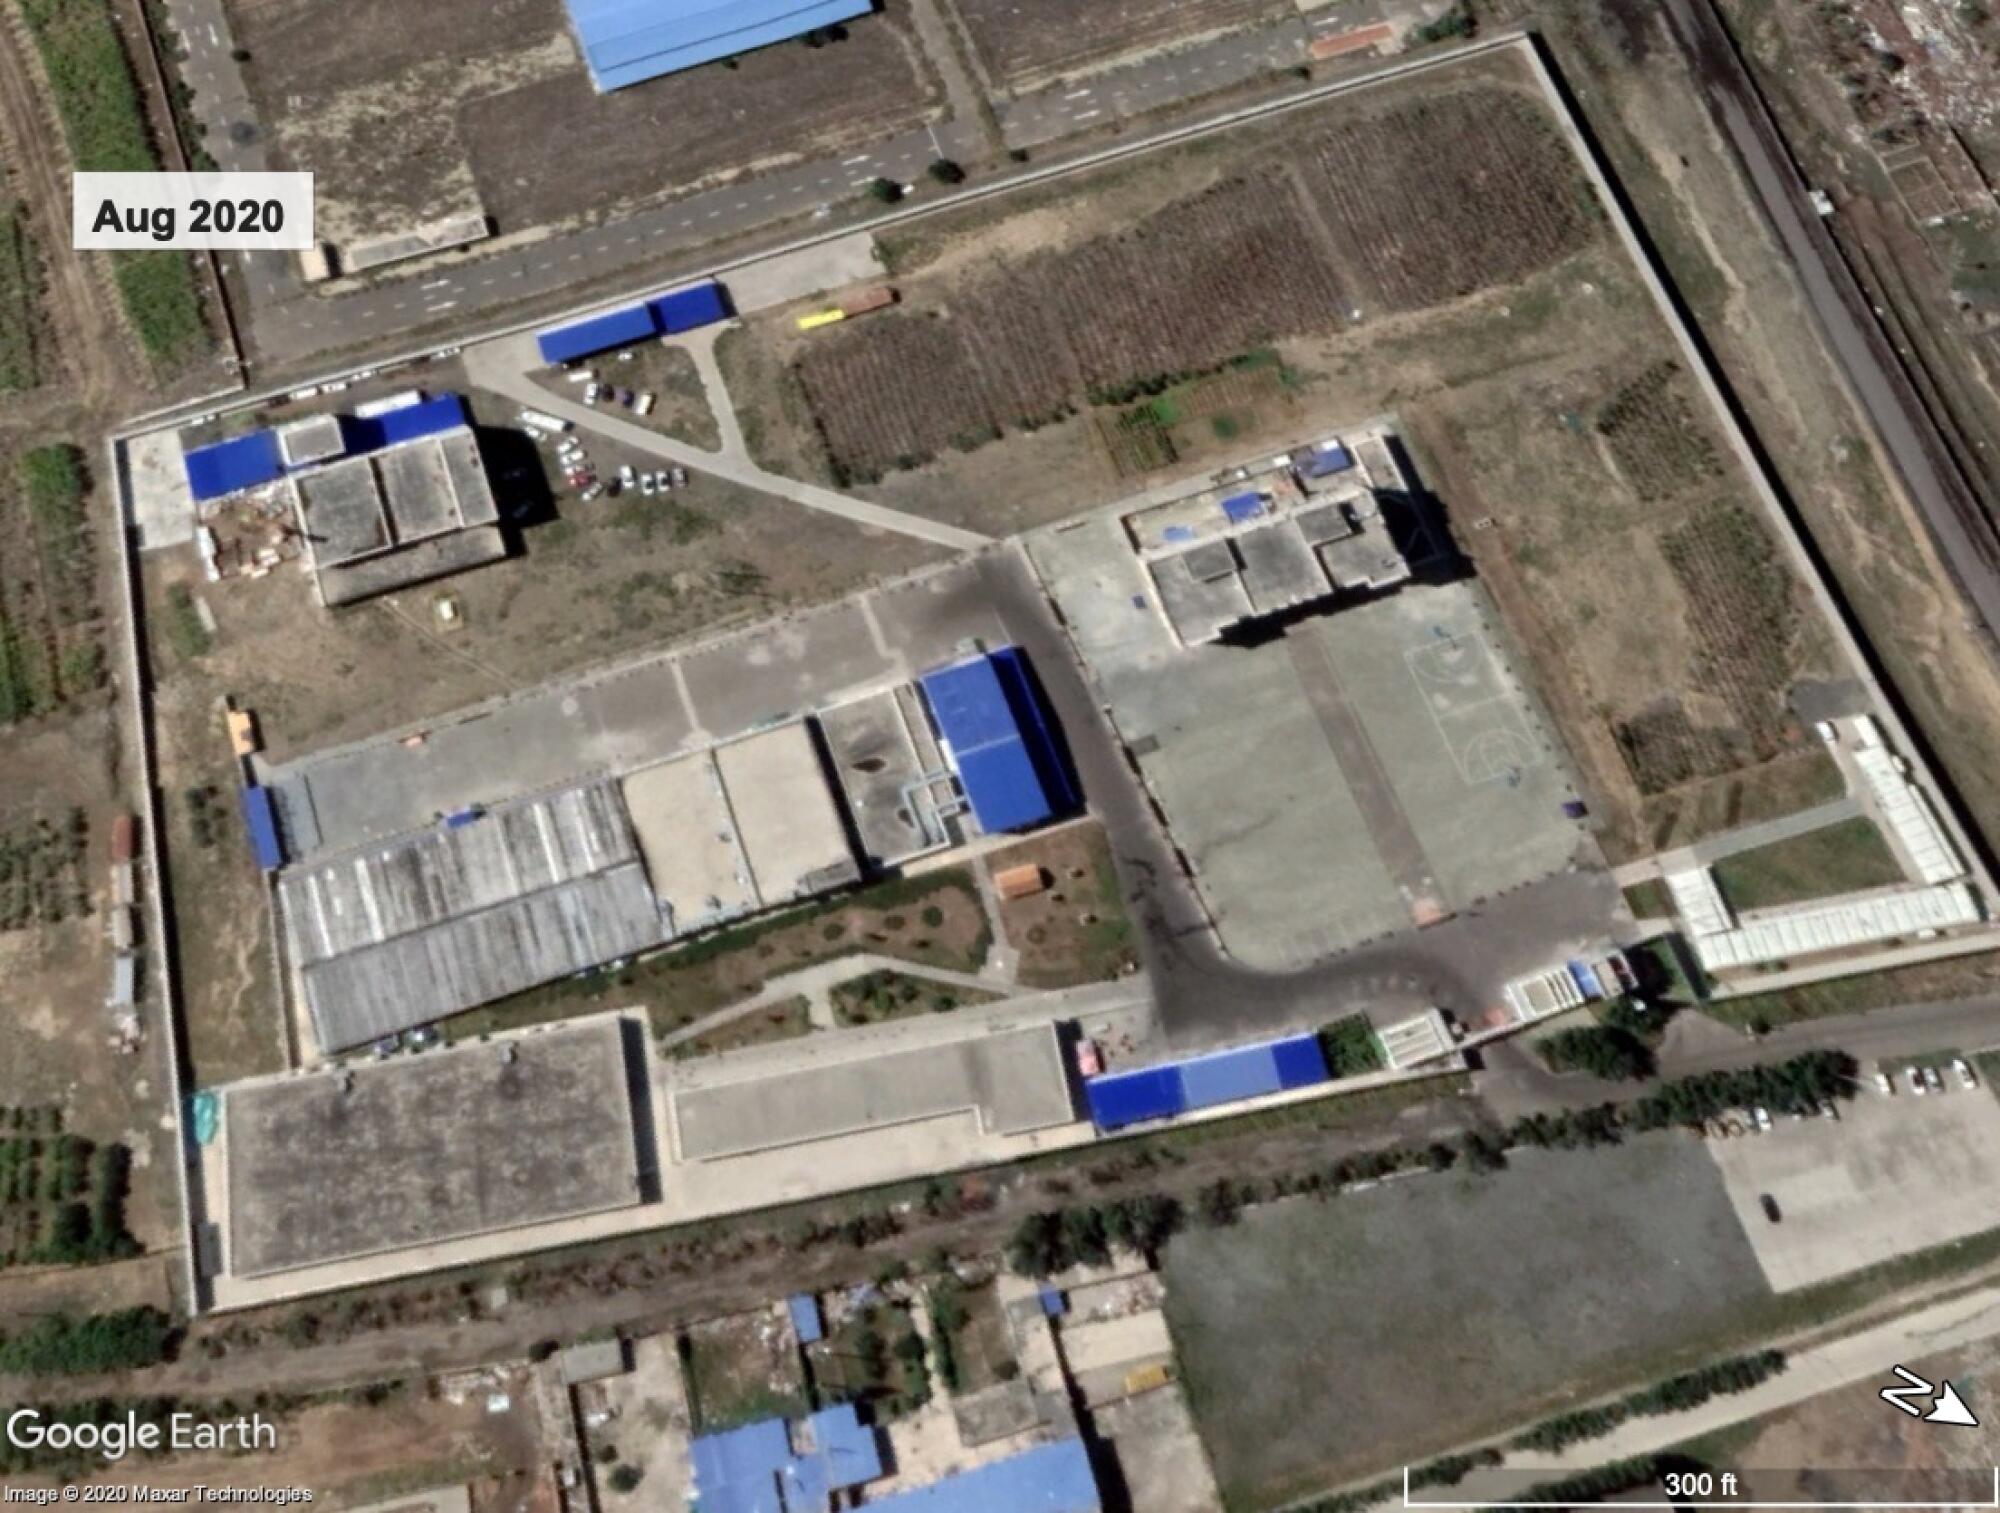 Satellite imagery of the same site in August 2020 shows that internal walls and fencing have been removed.